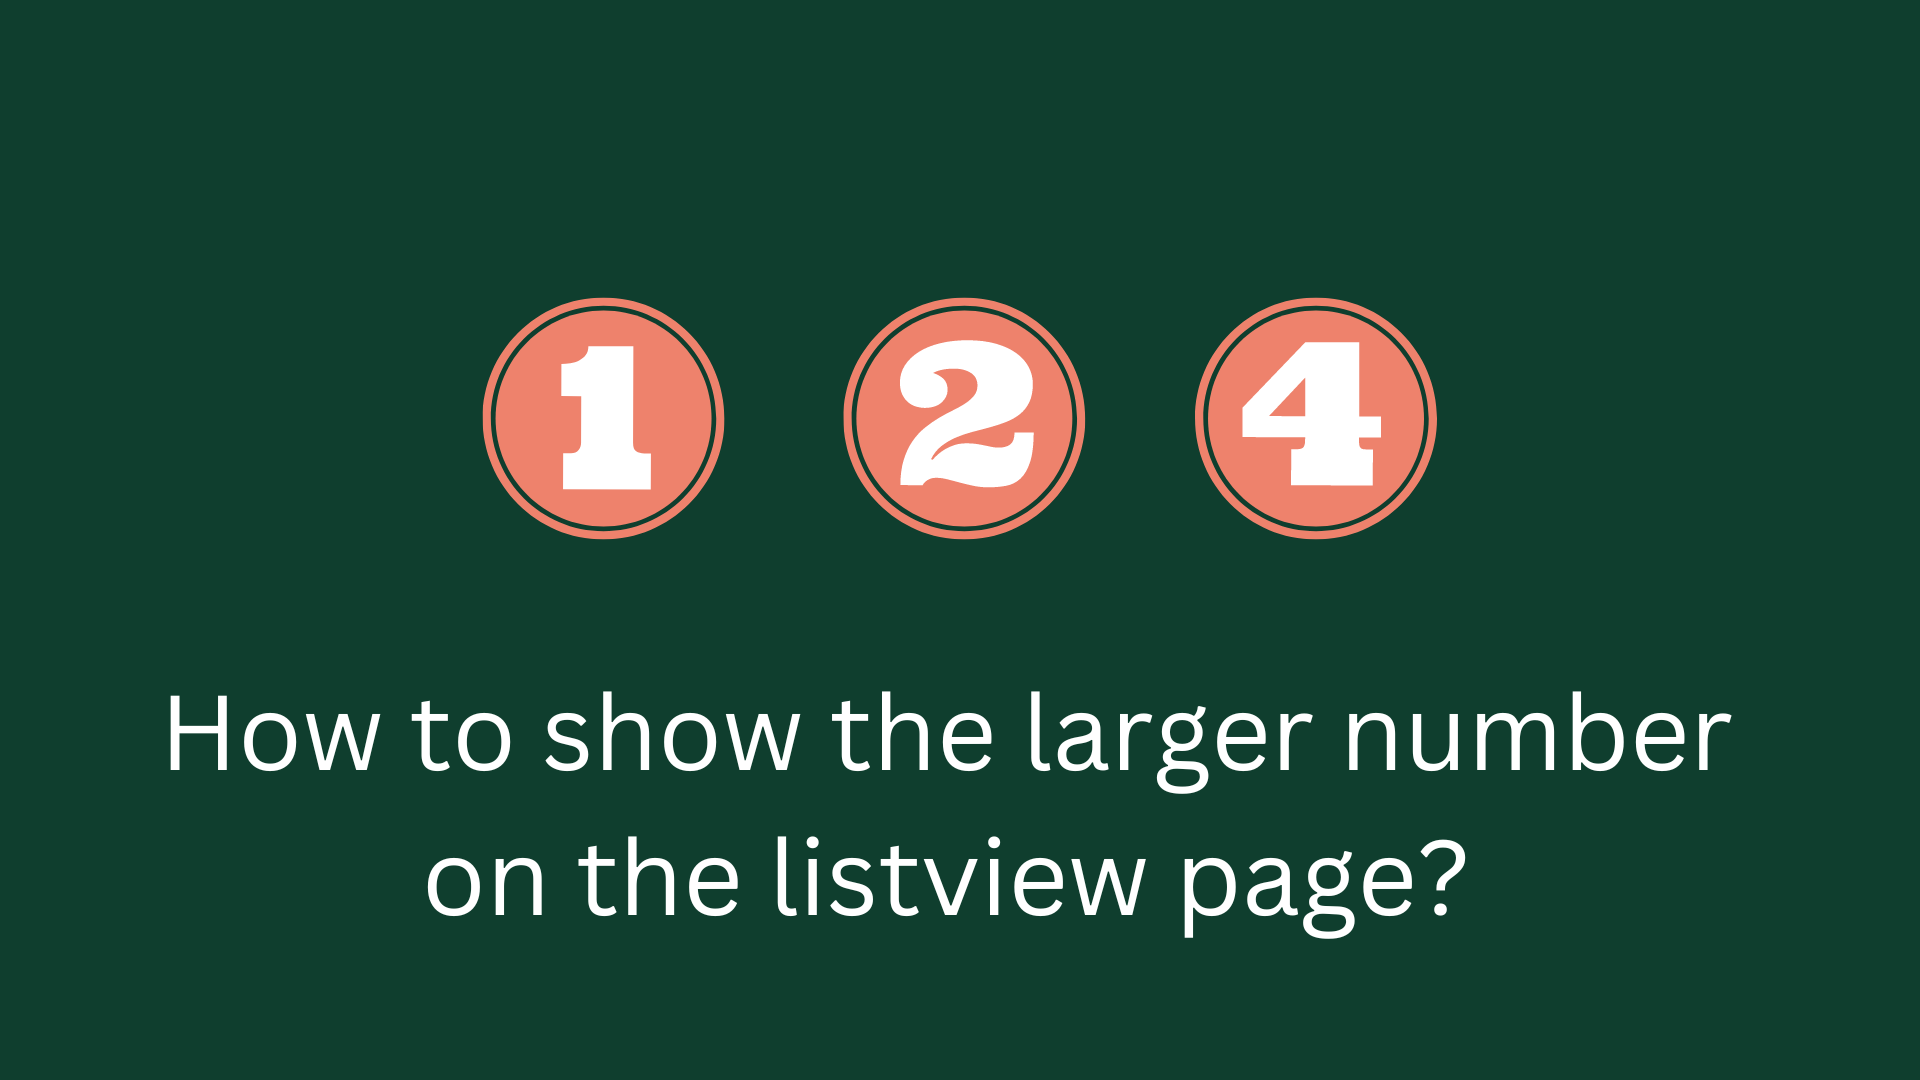 How to show the larger number on the listview page?